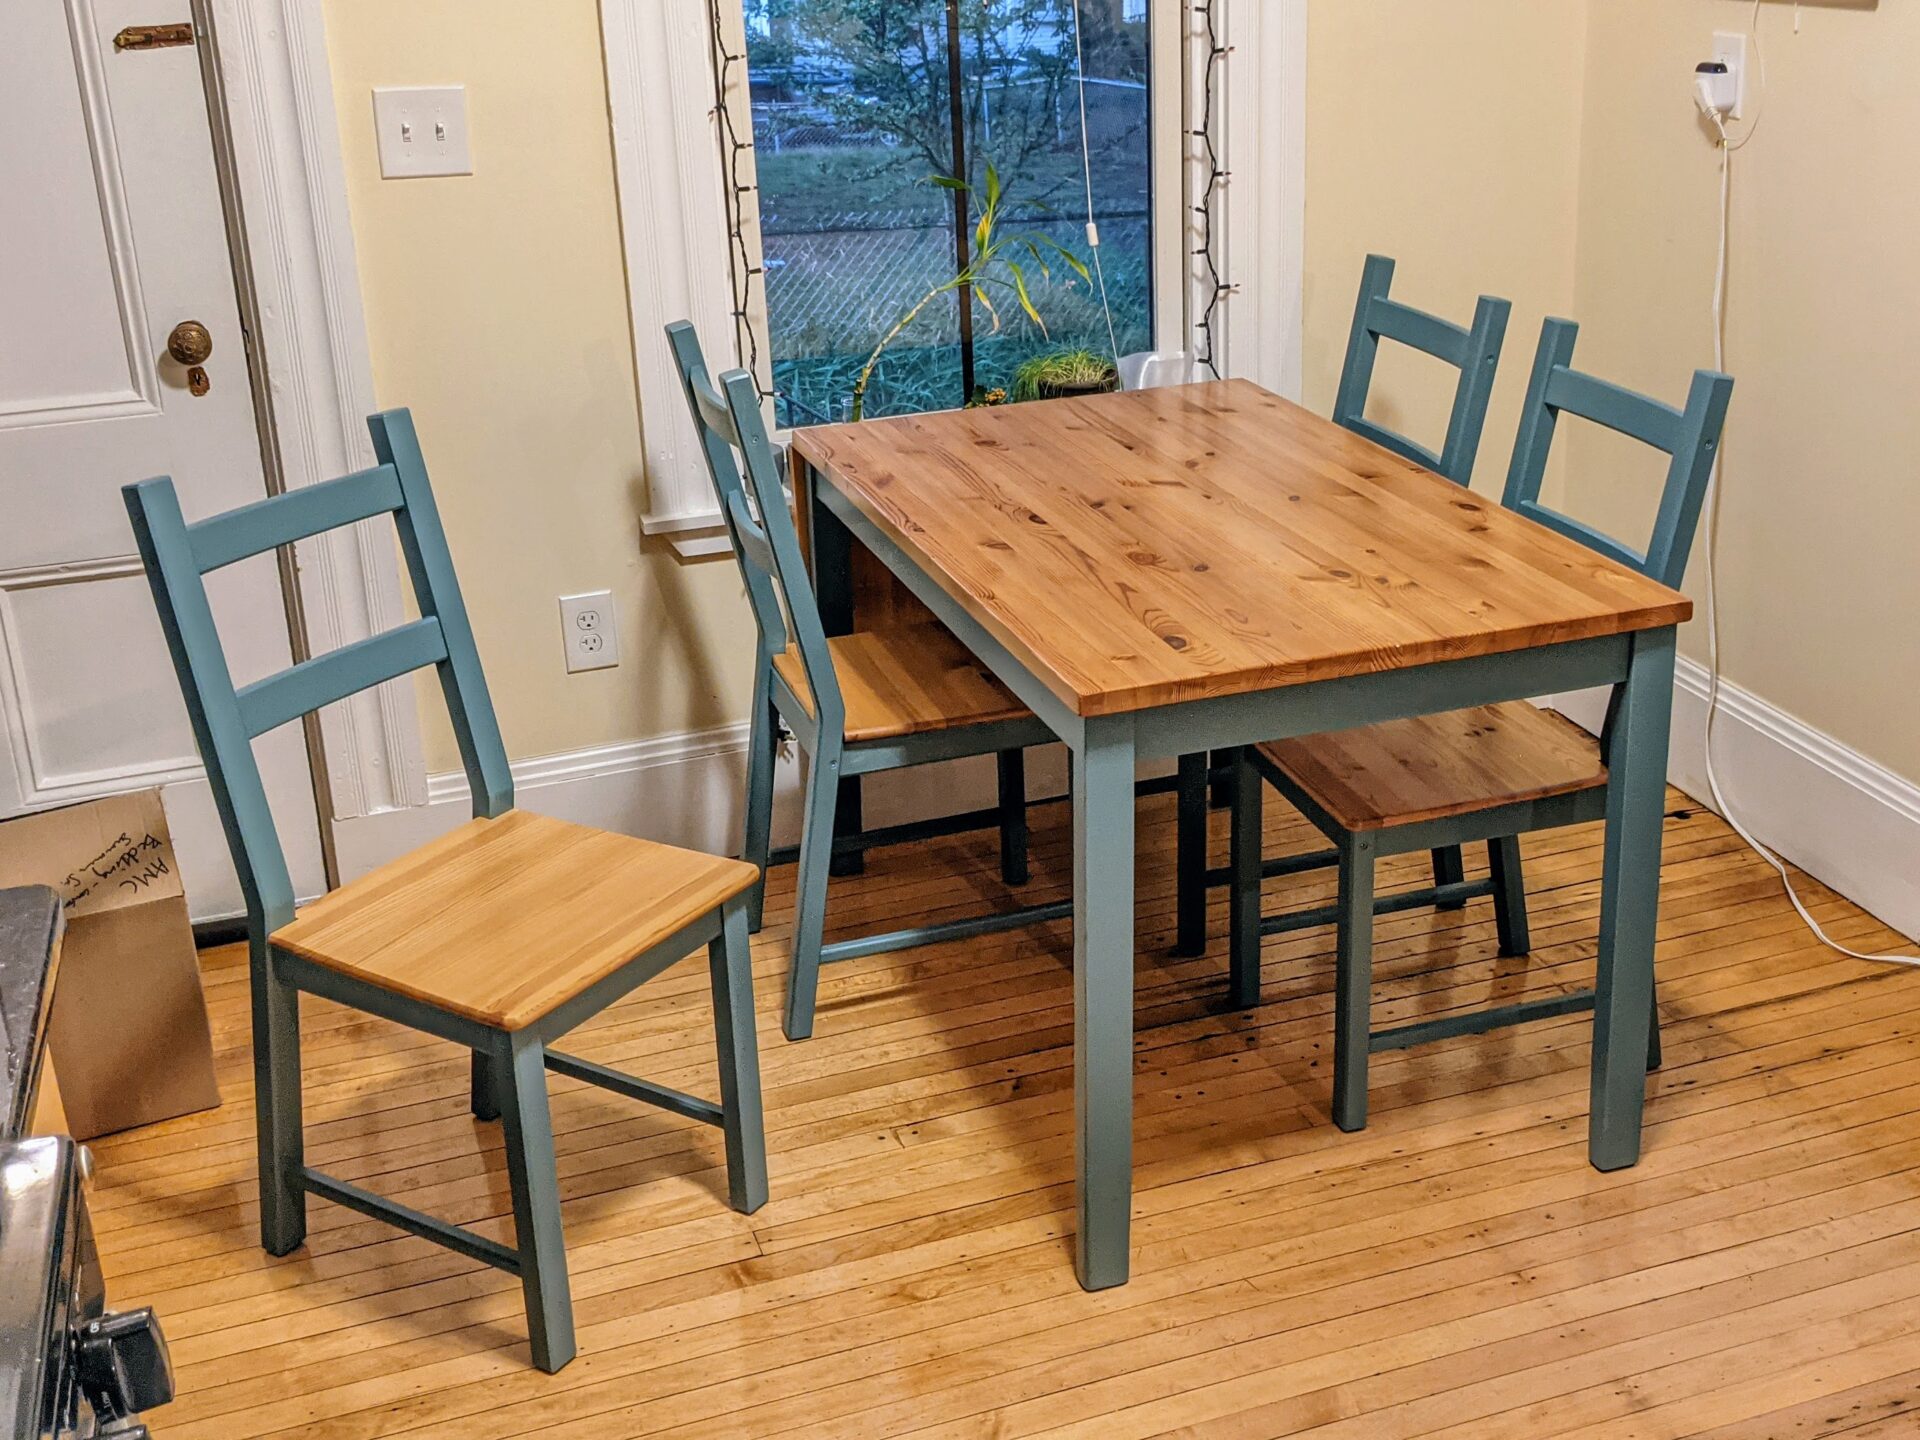 Finished table and chairs